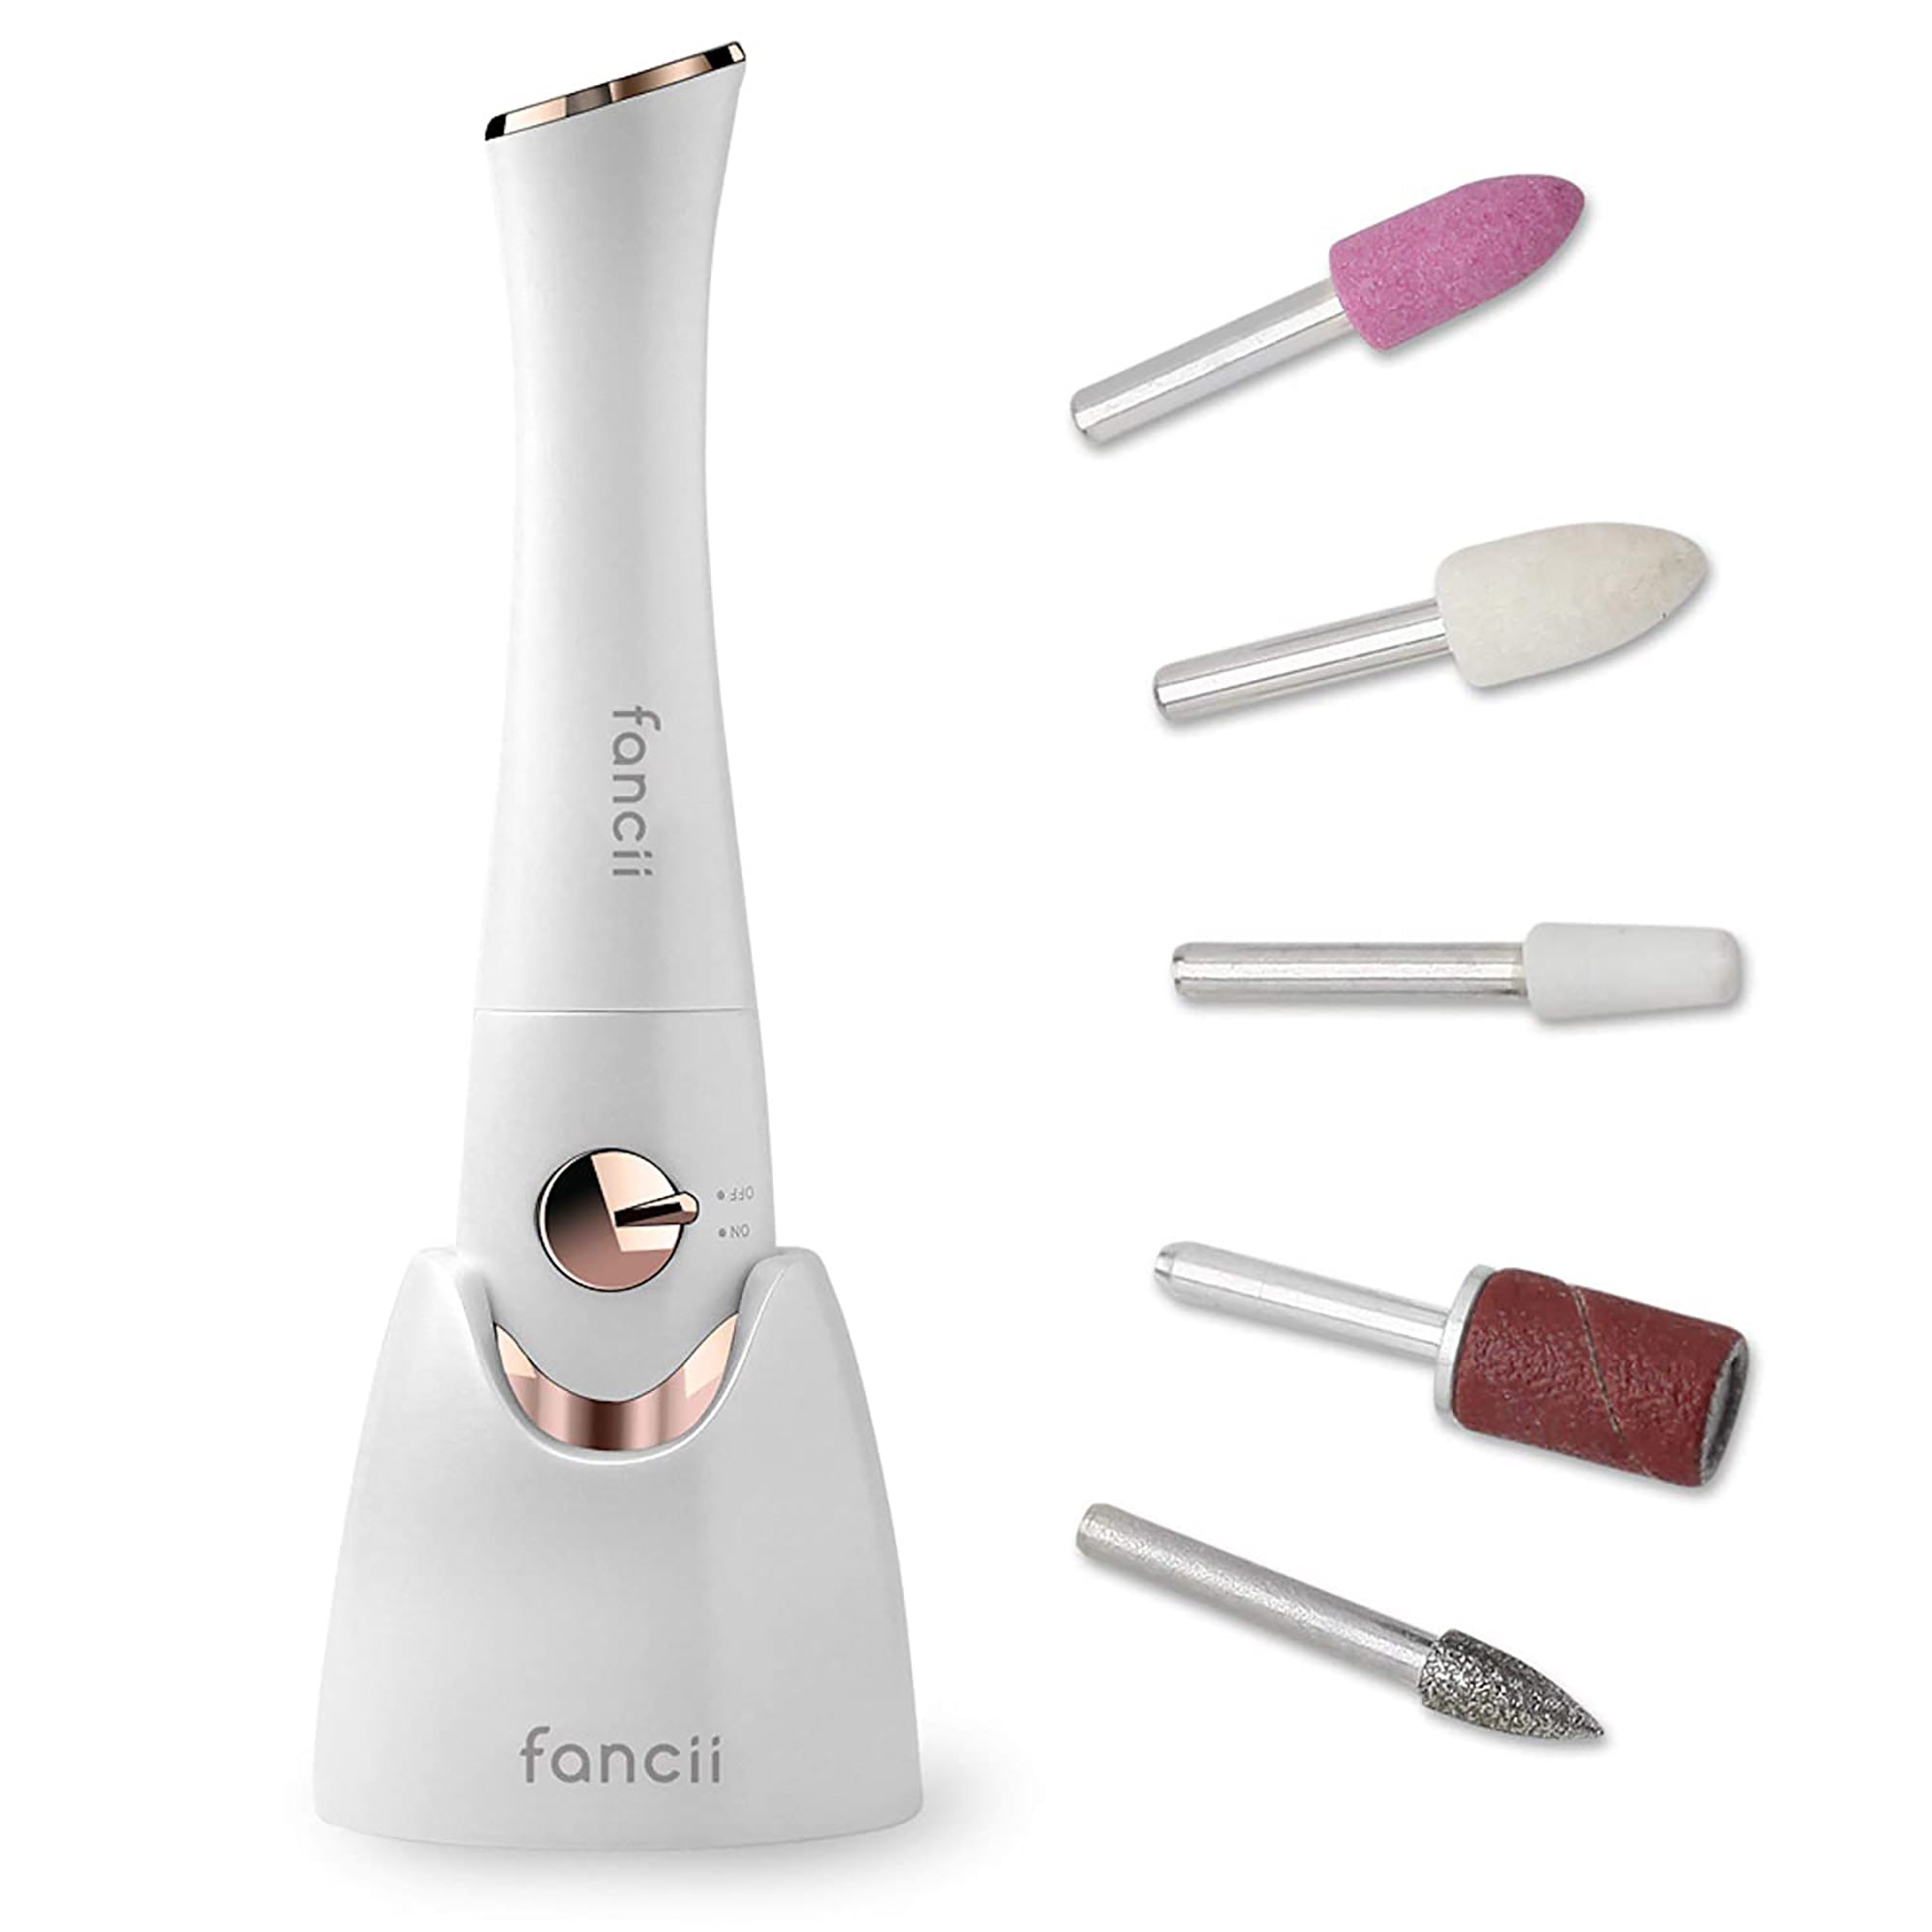 Fancii Mynt Cordless Manicure Pedicure Electric Nail File / Champagne / SWATCH